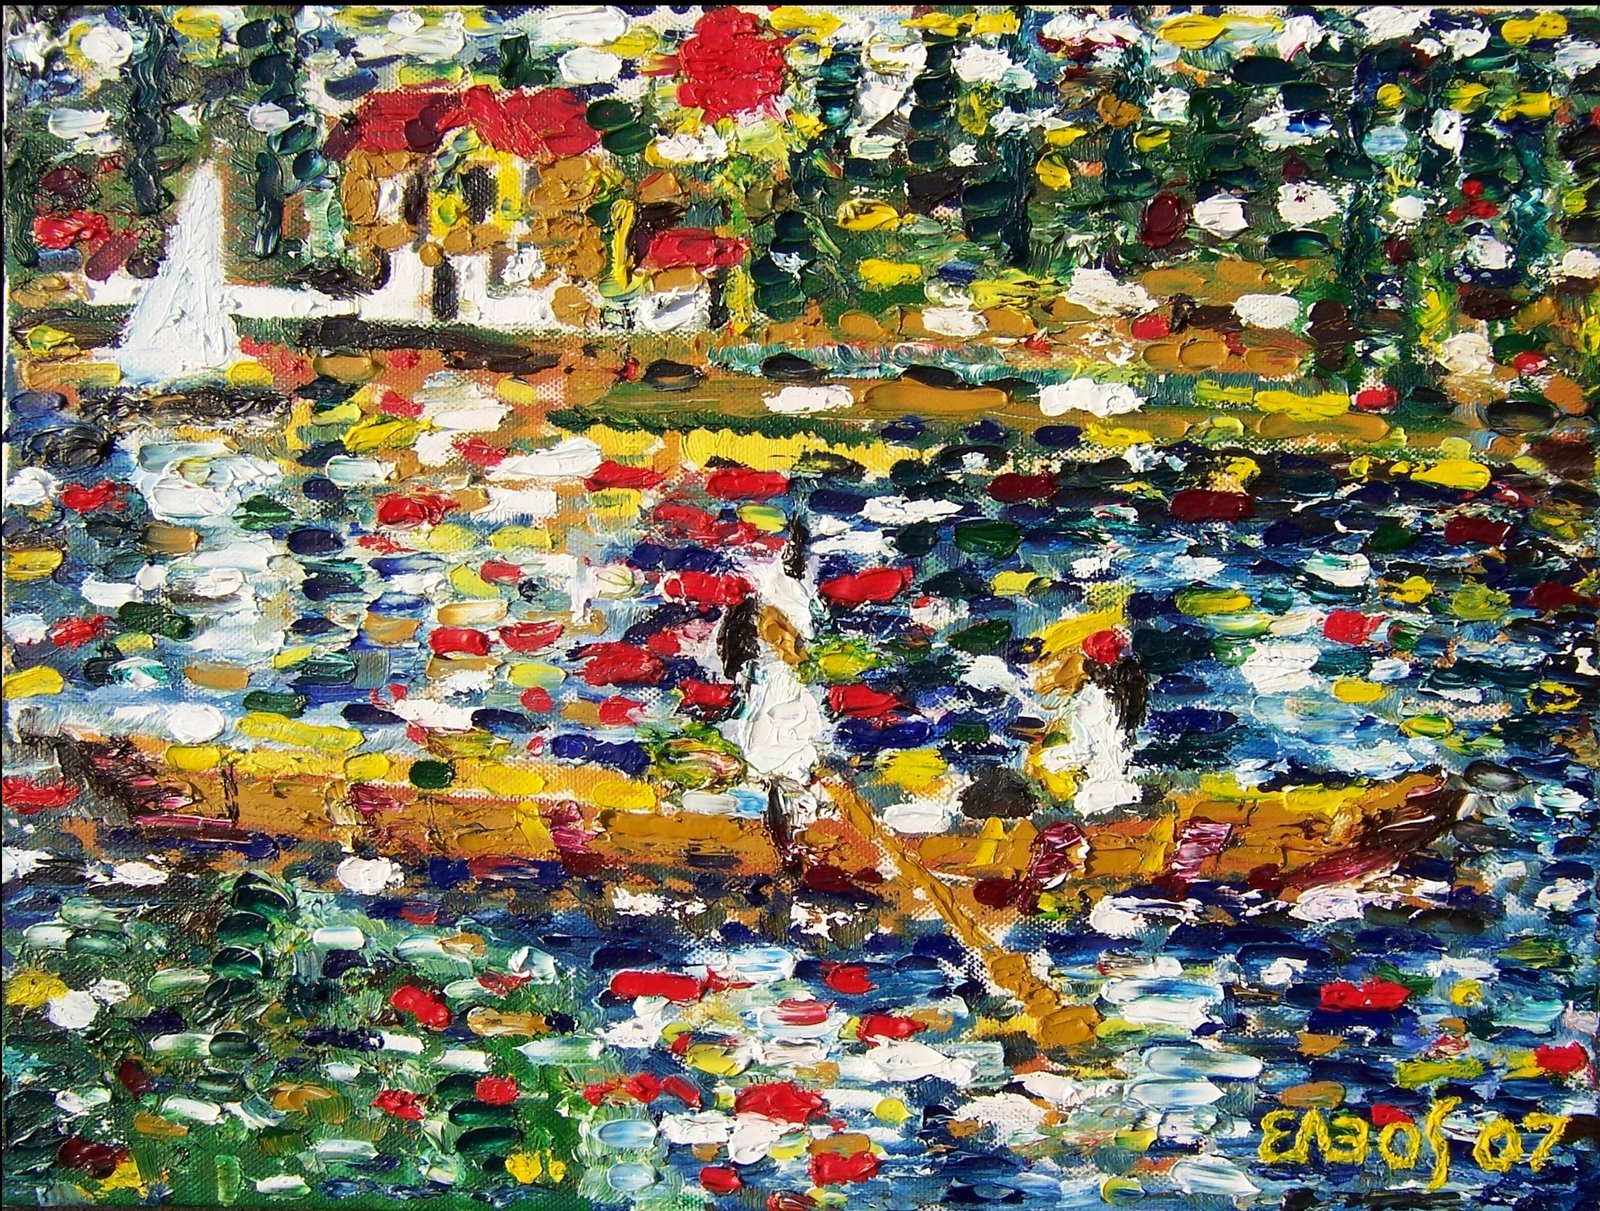 [Tibor+Babos+-+Boating+on+a+River+-+After+Renoir,+Oil+on+Canvas,+30X40+cm,+2007,+Brussels.jpg]